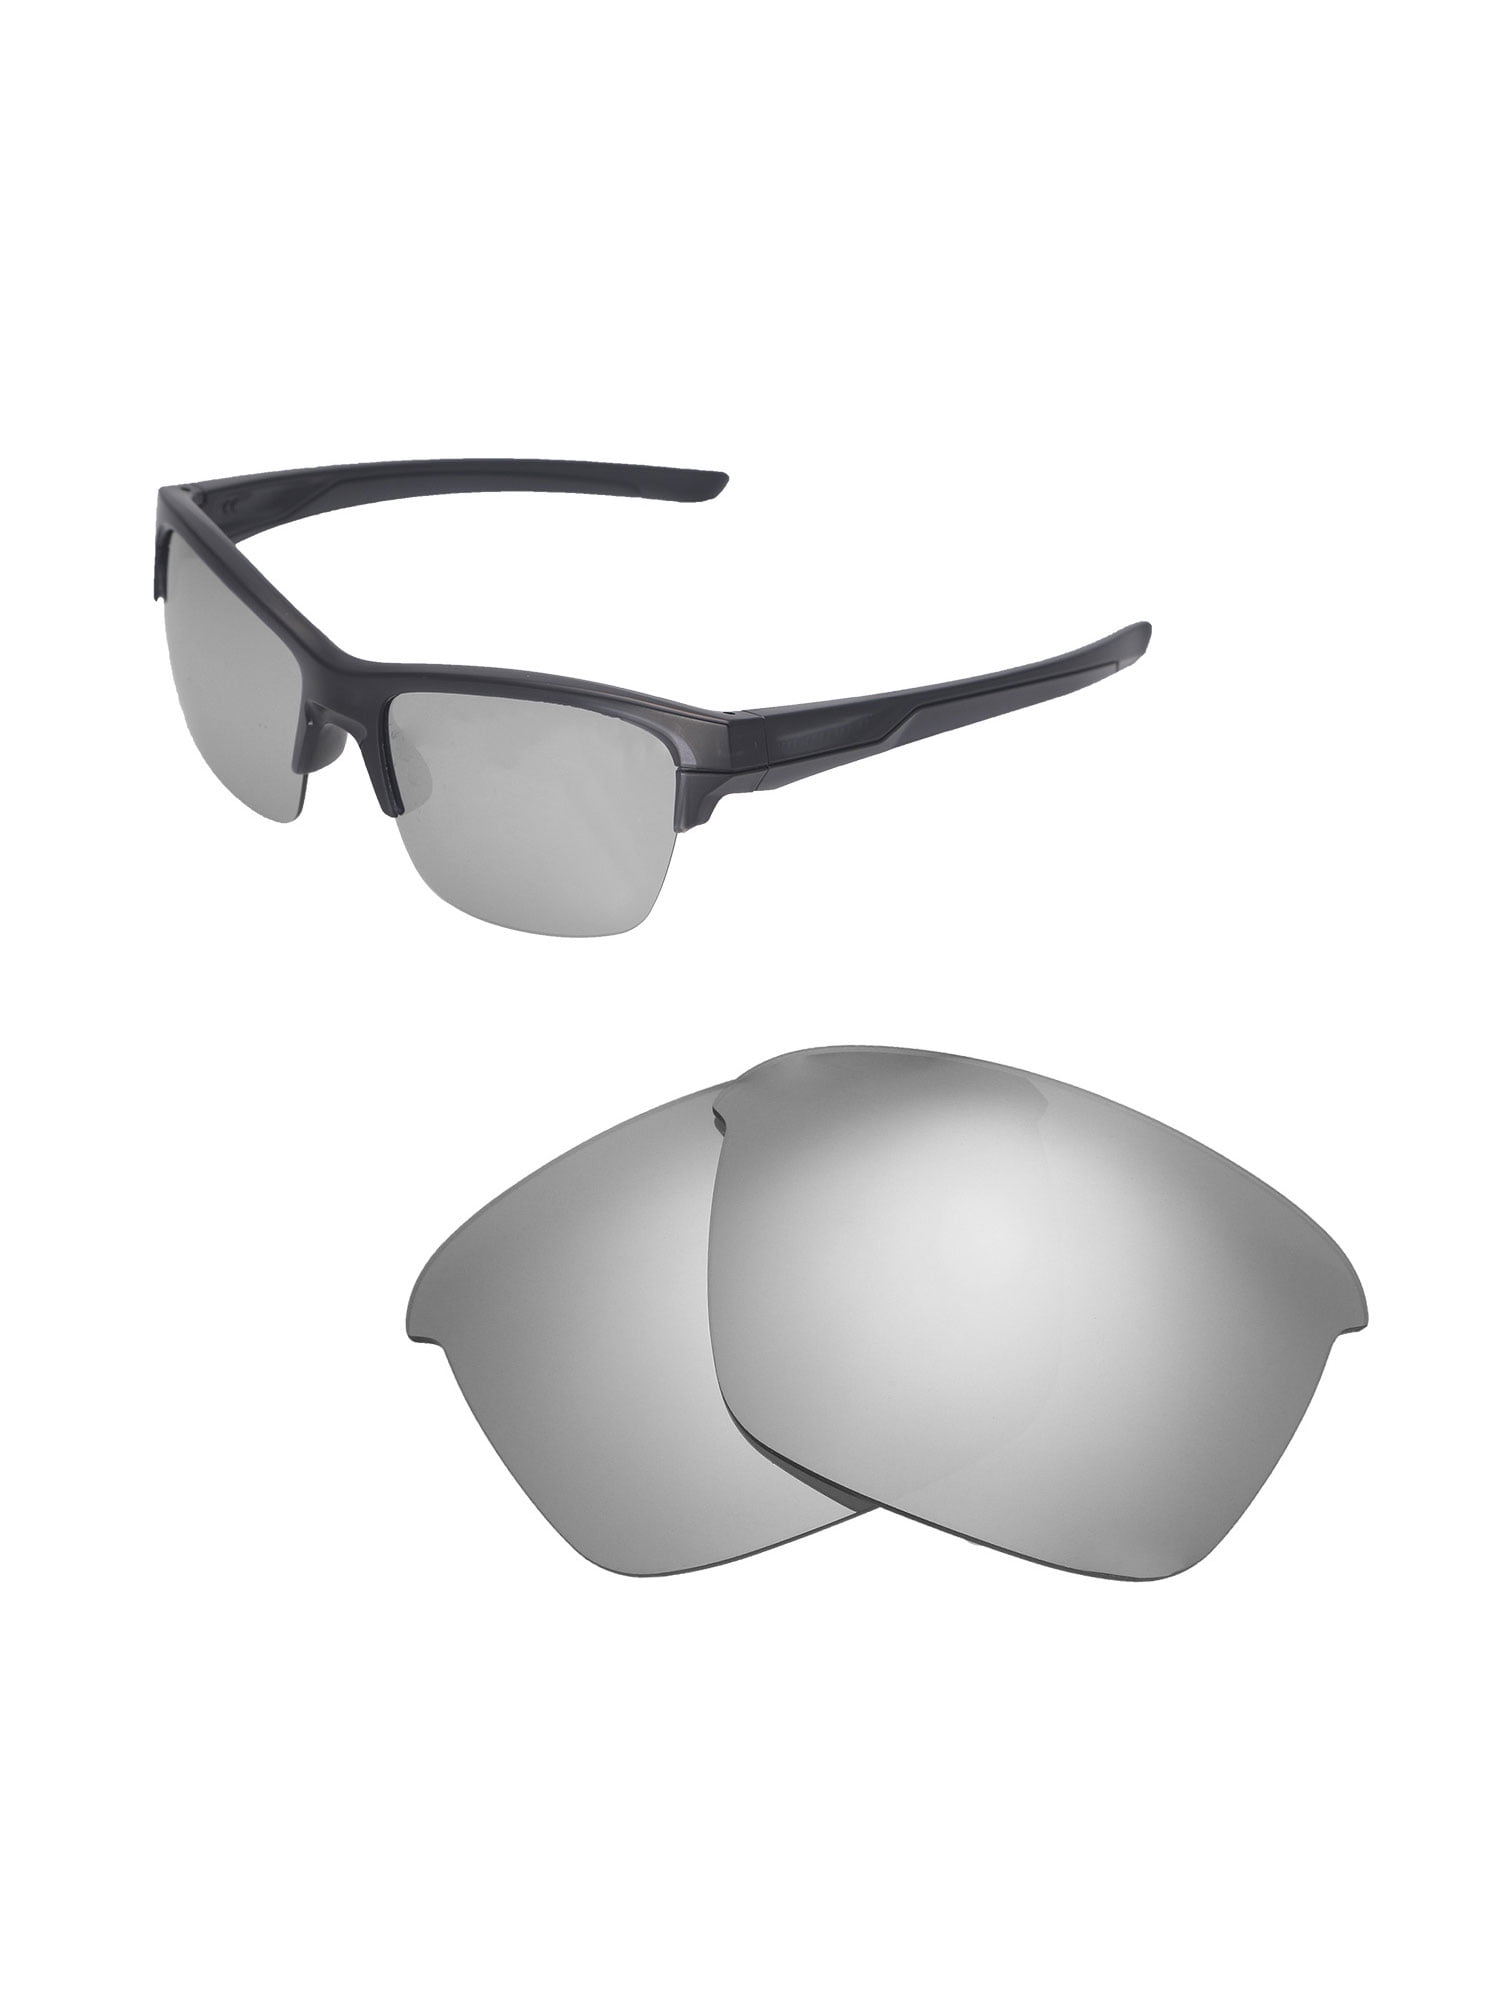 thinlink replacement lenses